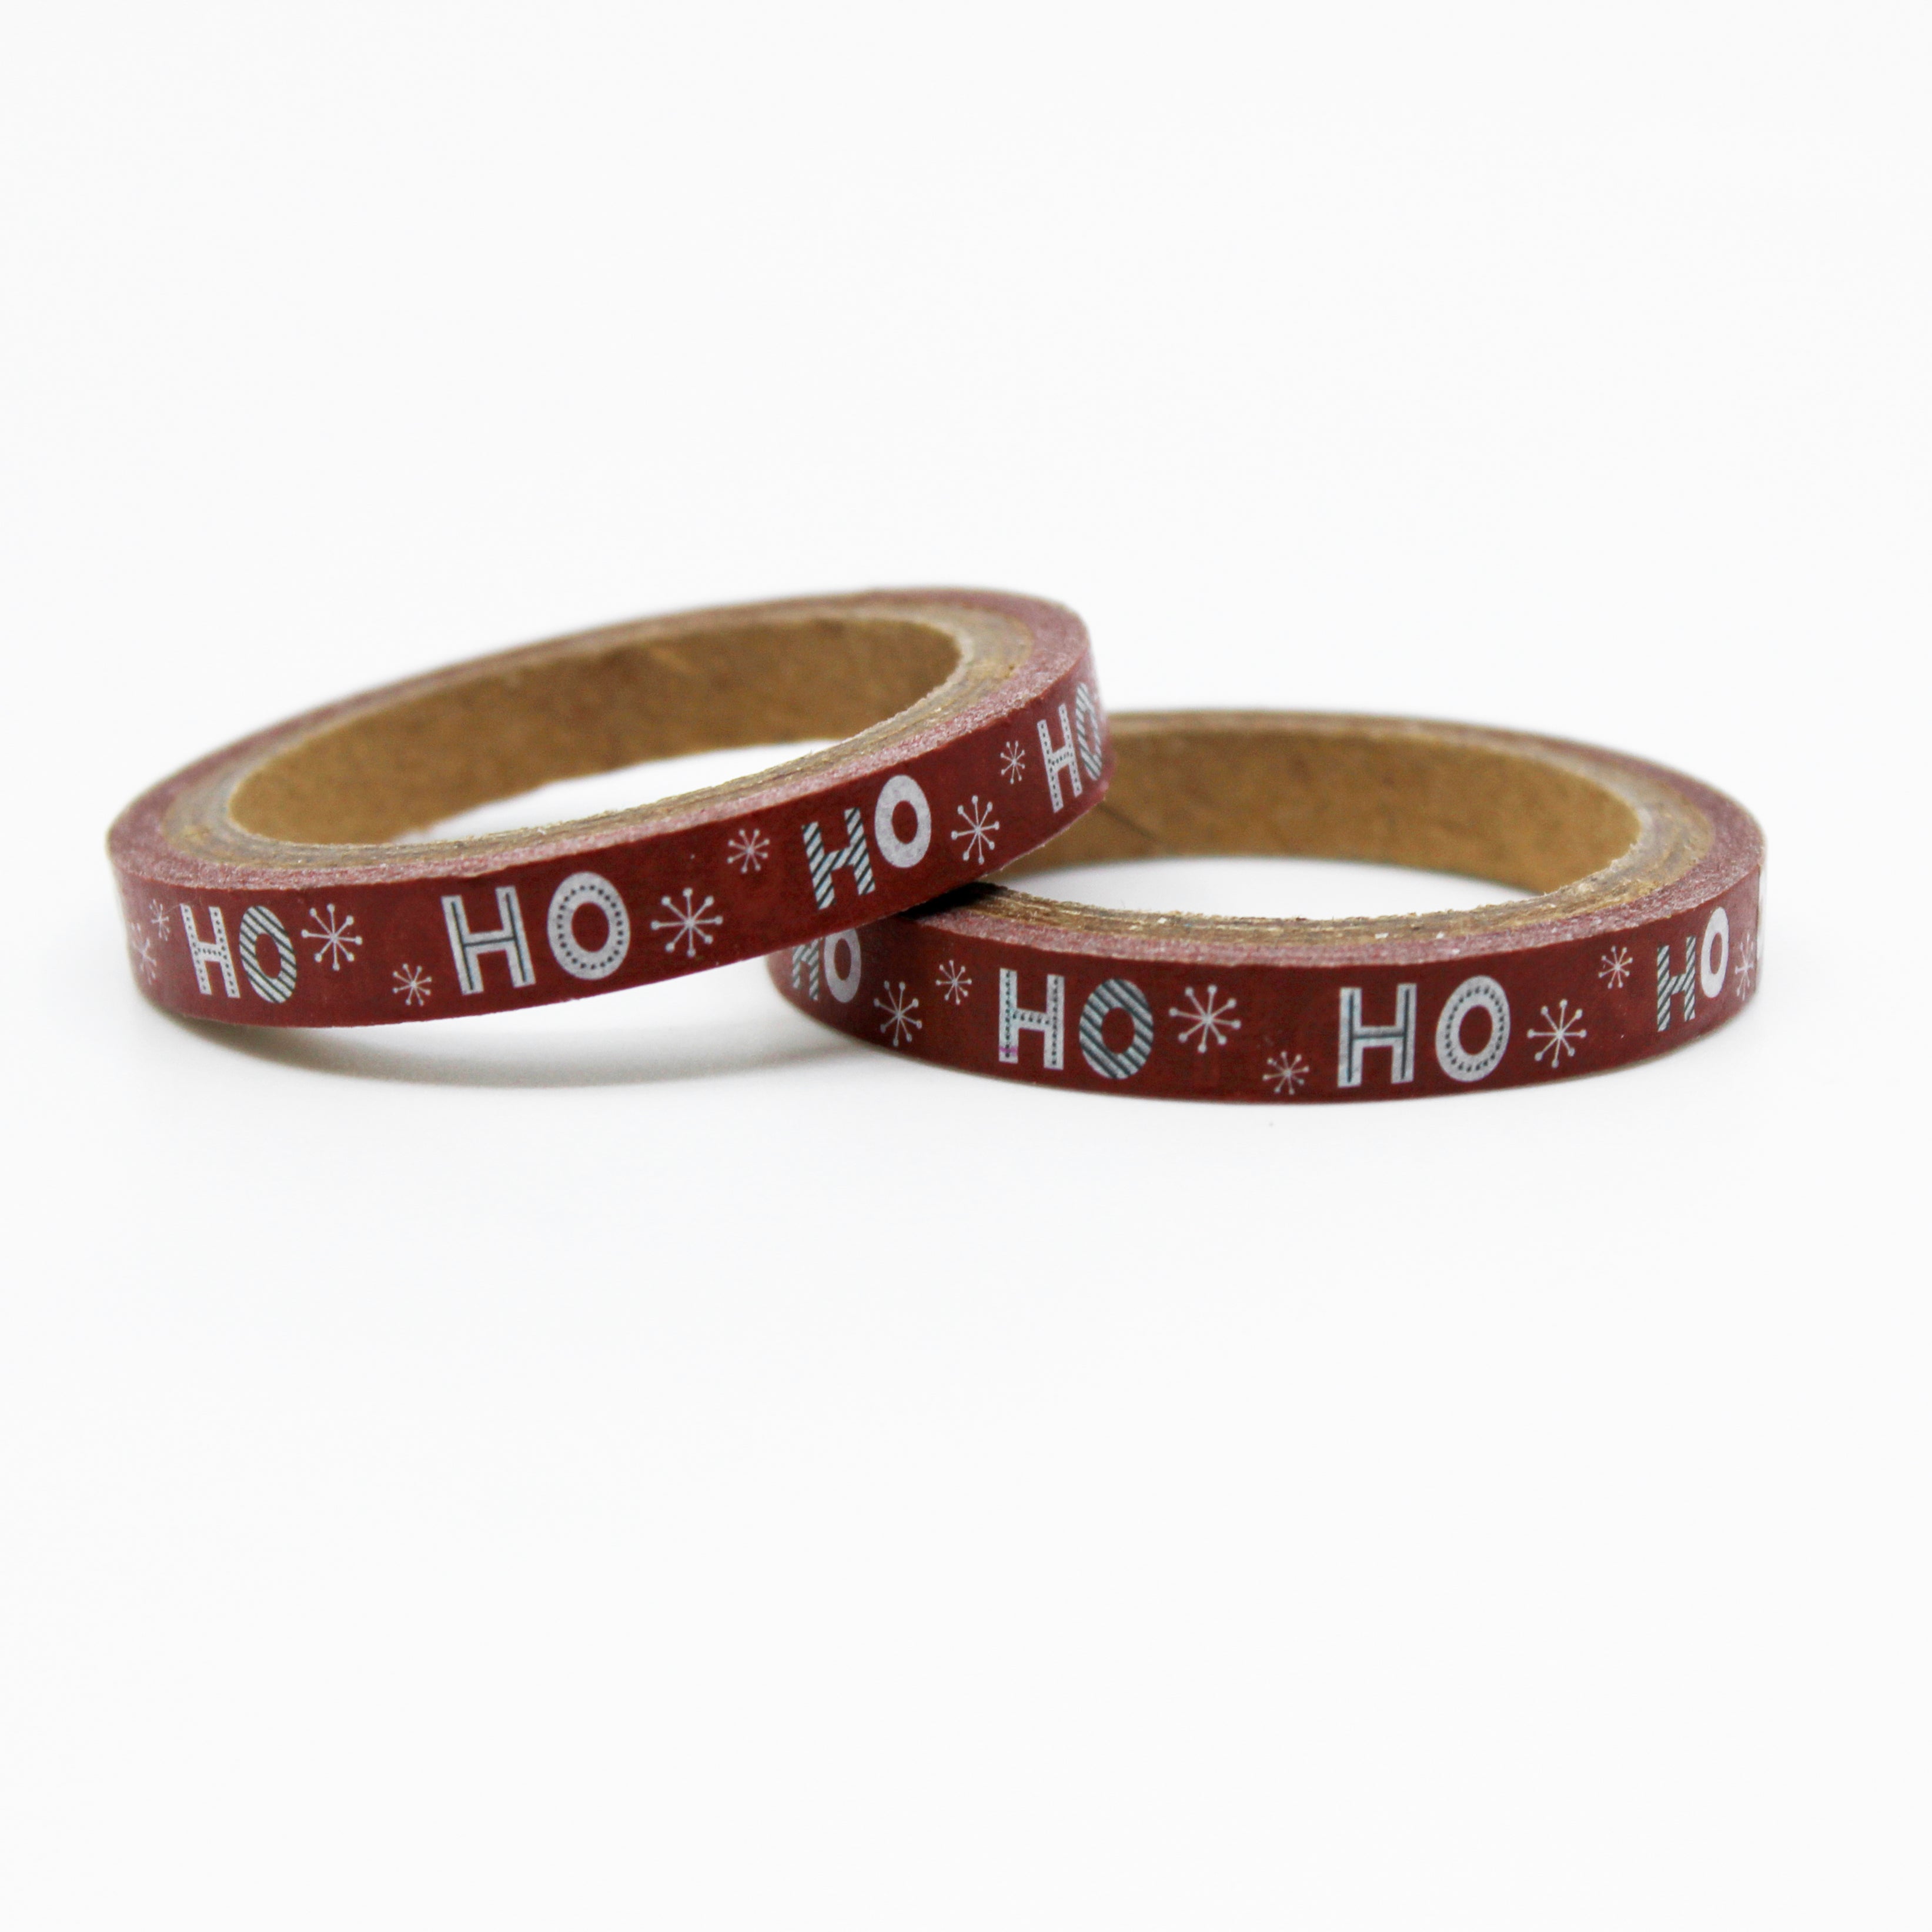 our Christmas "Ho Ho Ho" Washi Tape, a tape that captures the jolly spirit of the holiday season with a touch of festive cheer. This tape is sold at BBB Supplies Craft Shop.